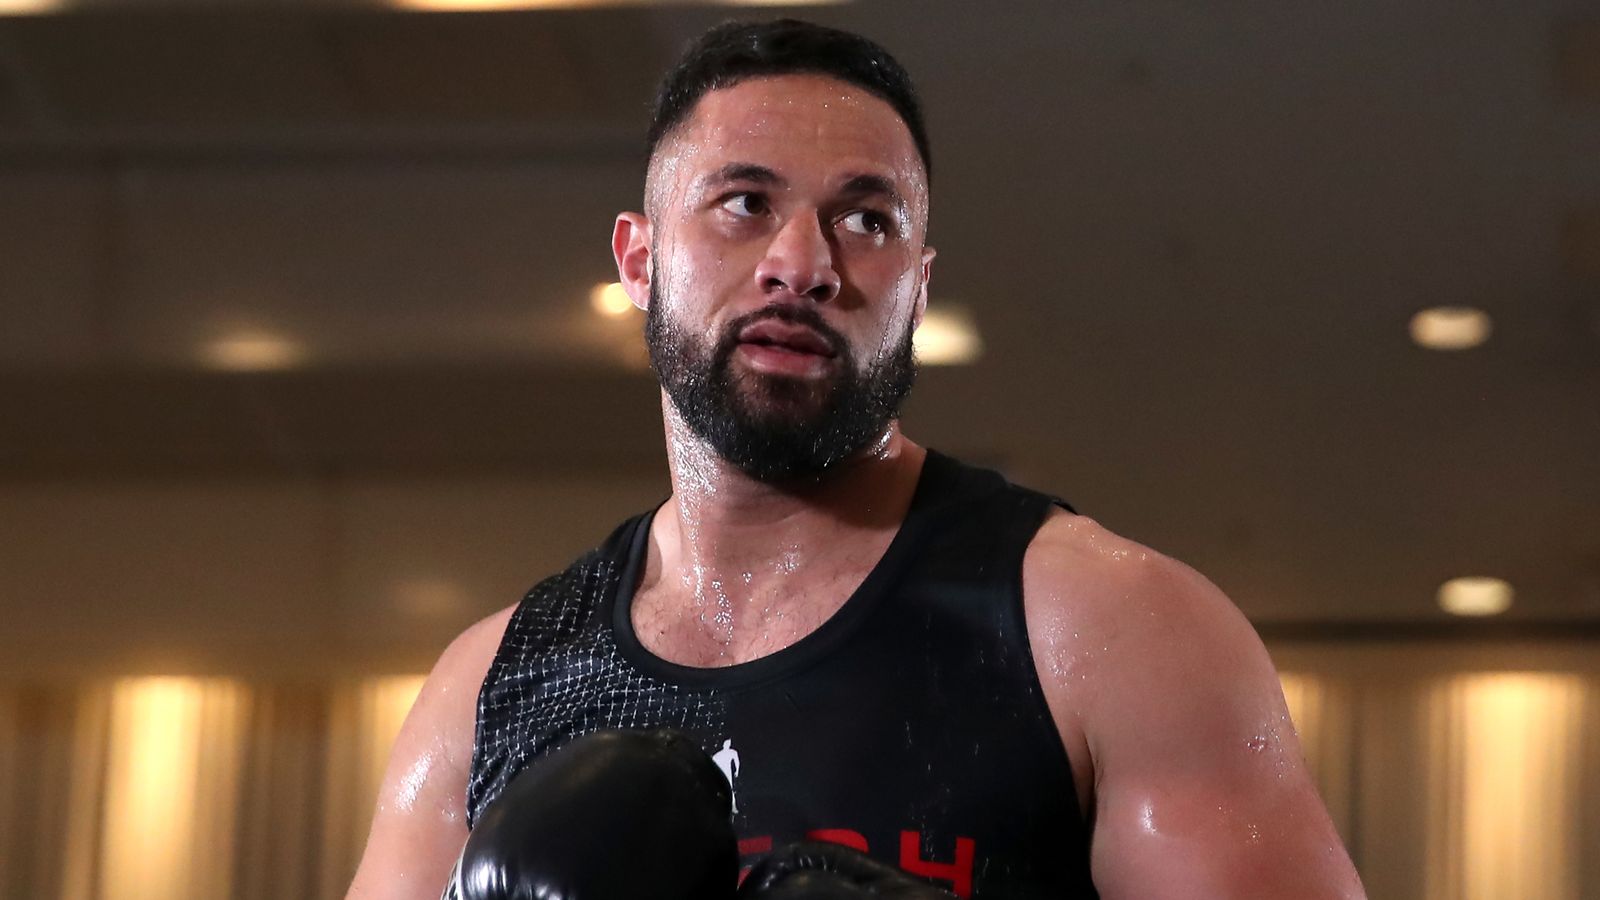 Joseph Parker looking for an explosive finish against Jack Massey Anthony Joshua, Dillian Whyte, if youre looking for a fight, come to me Boxing News Sky Sports